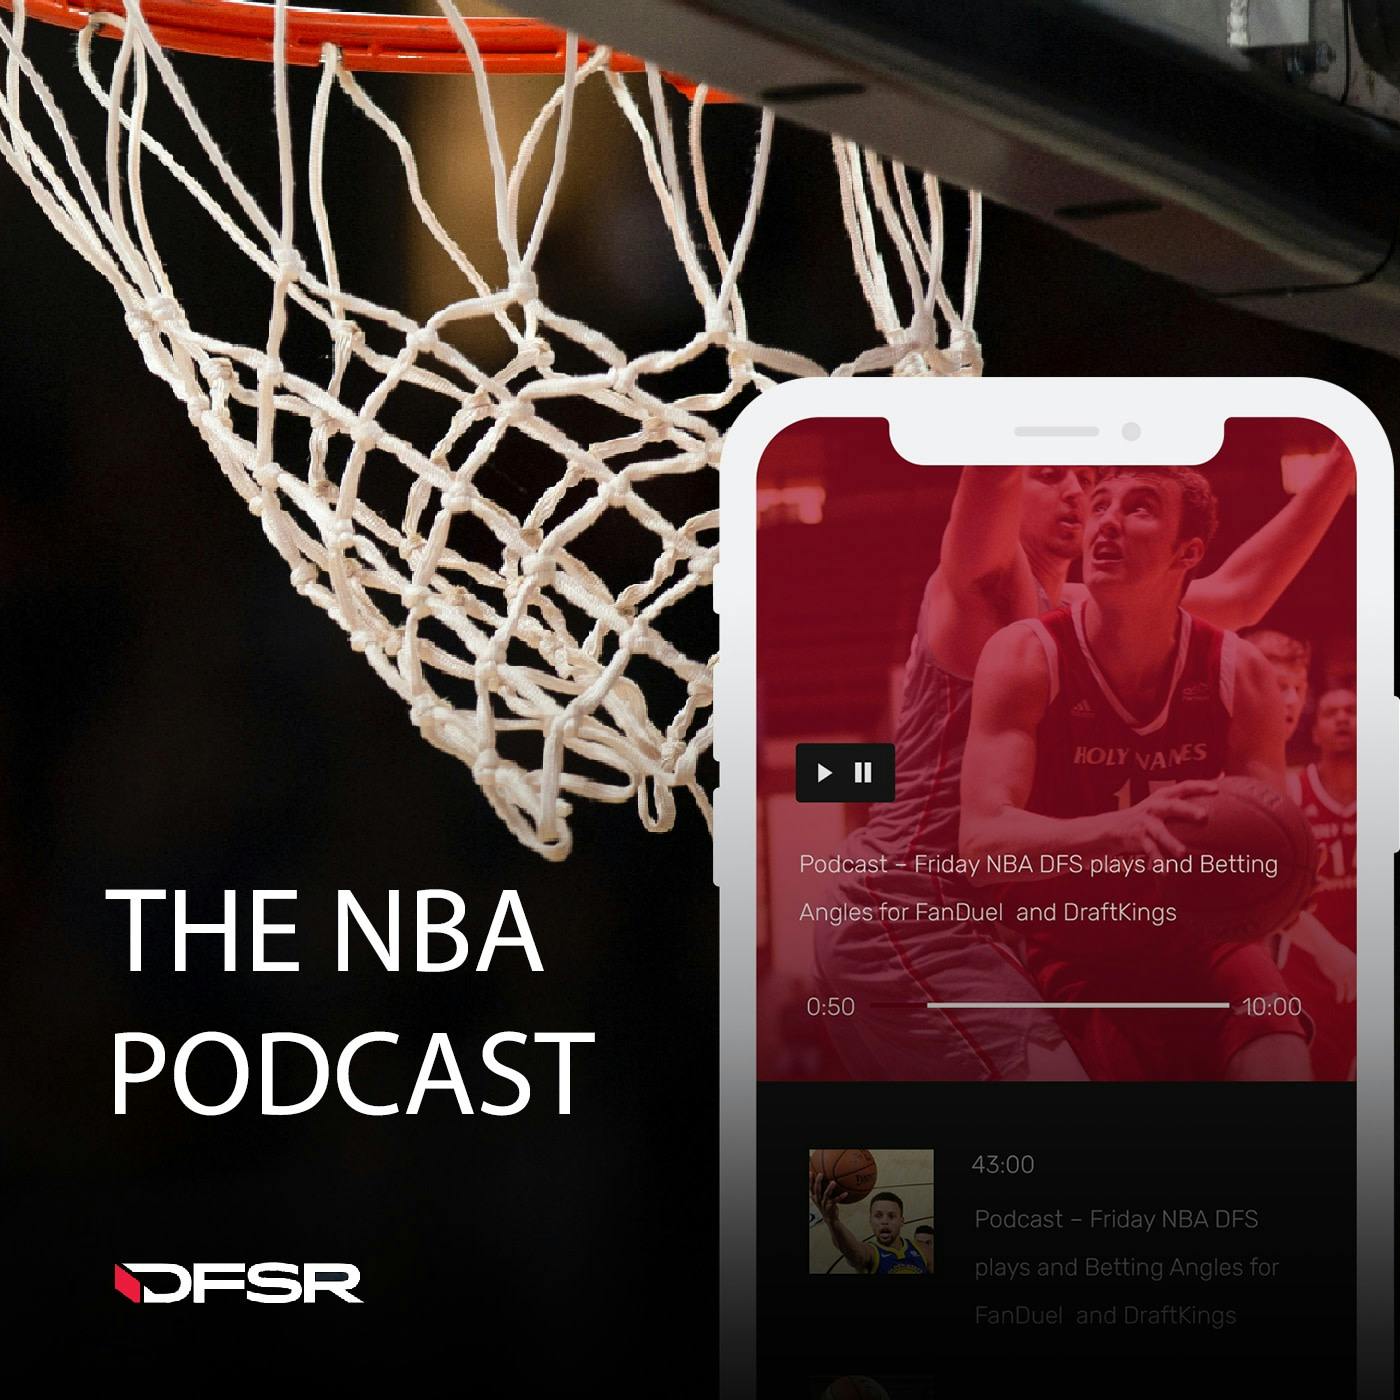 DFS NBA Podcast for Friday 10/26/18